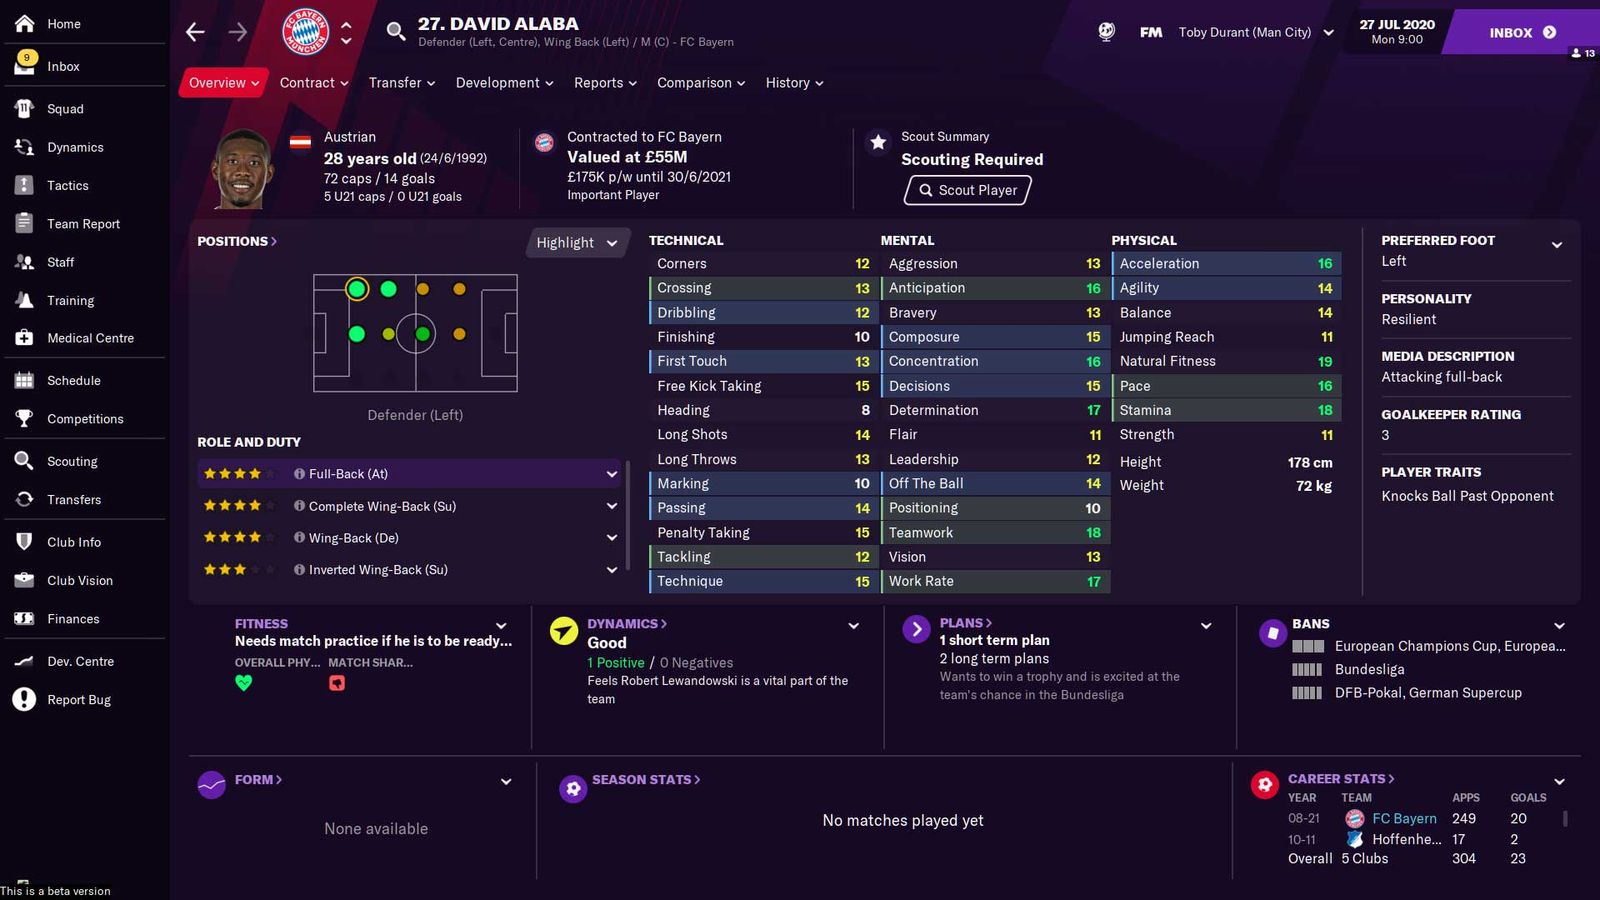 David Alaba's stats in Football Manager 2021